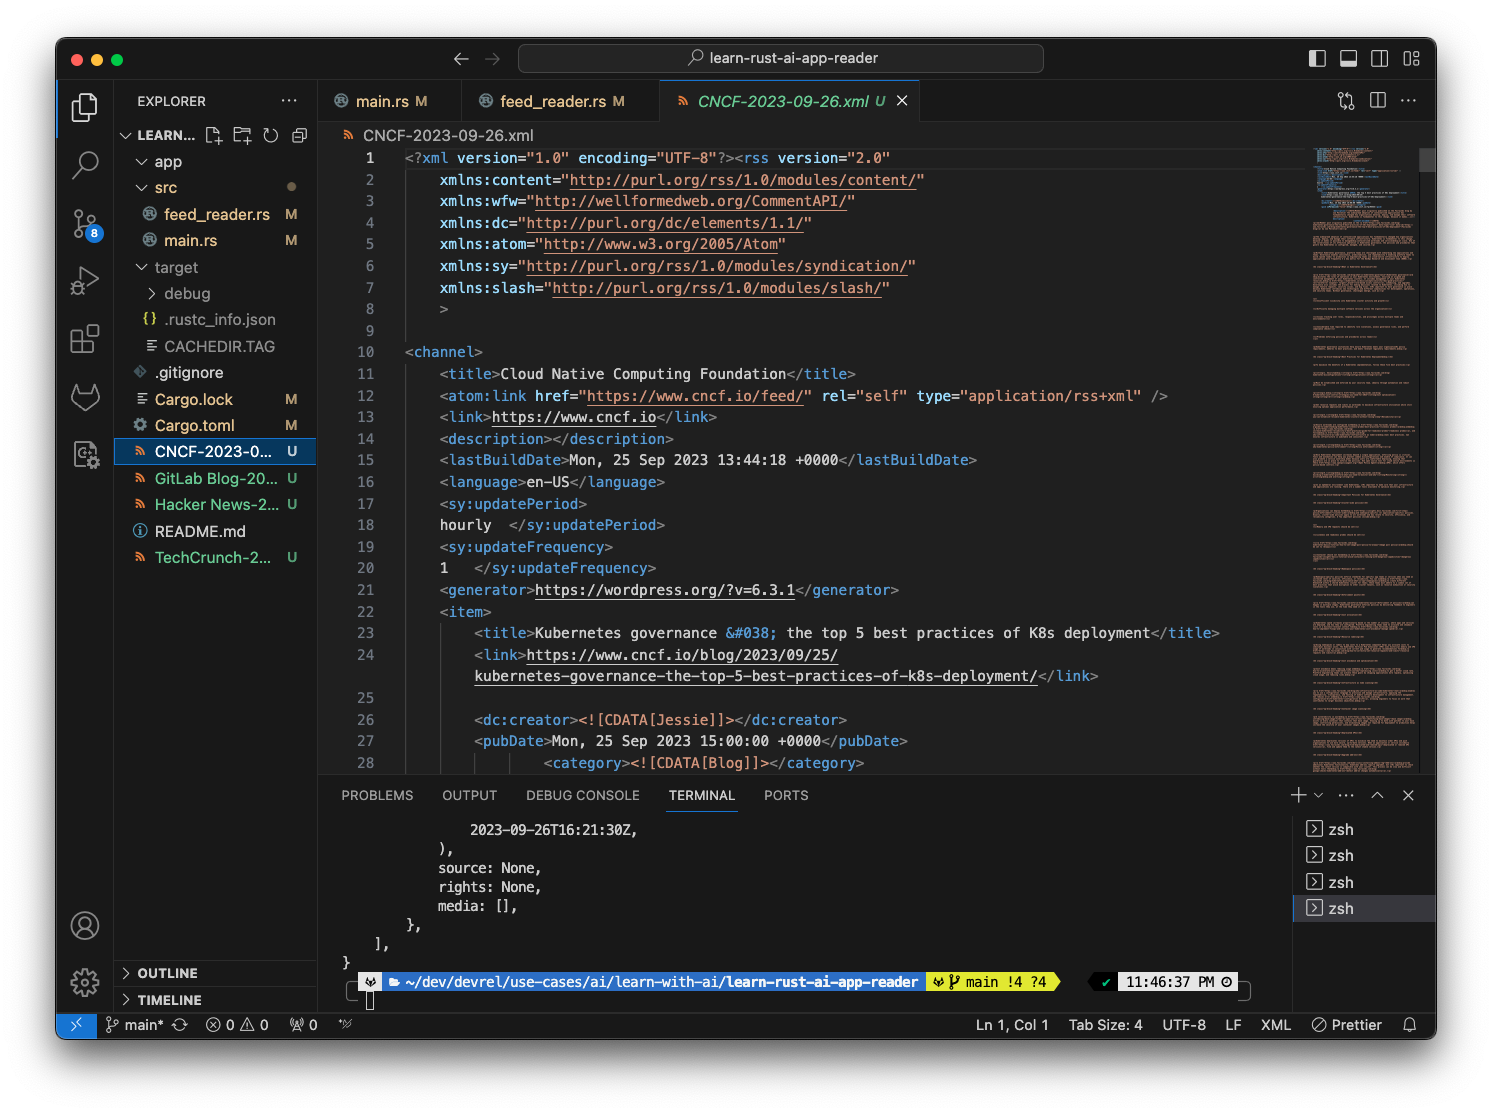 VS Code with CNCF RSS feed content file, saved on disk